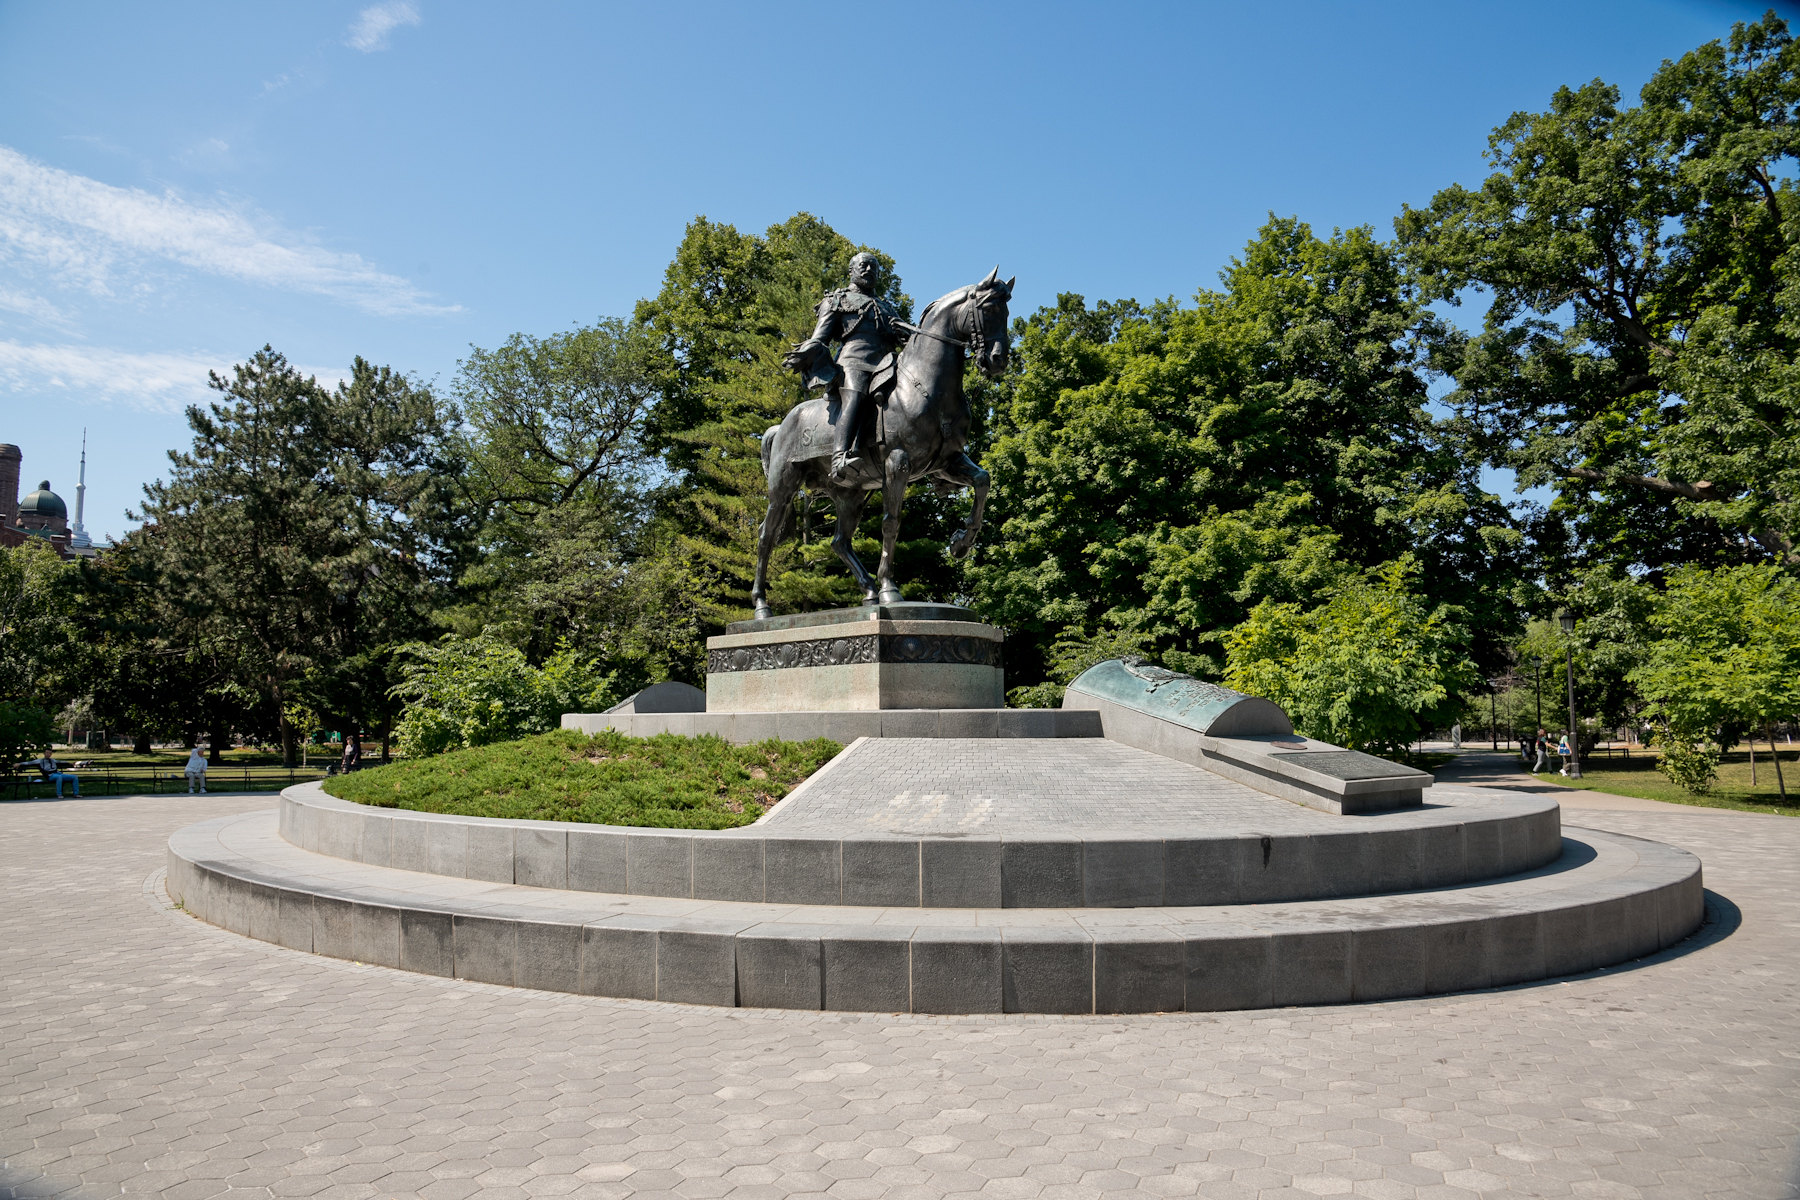 Image of a monument of a man on a horse raised on a plinth in a landscaped park setting.